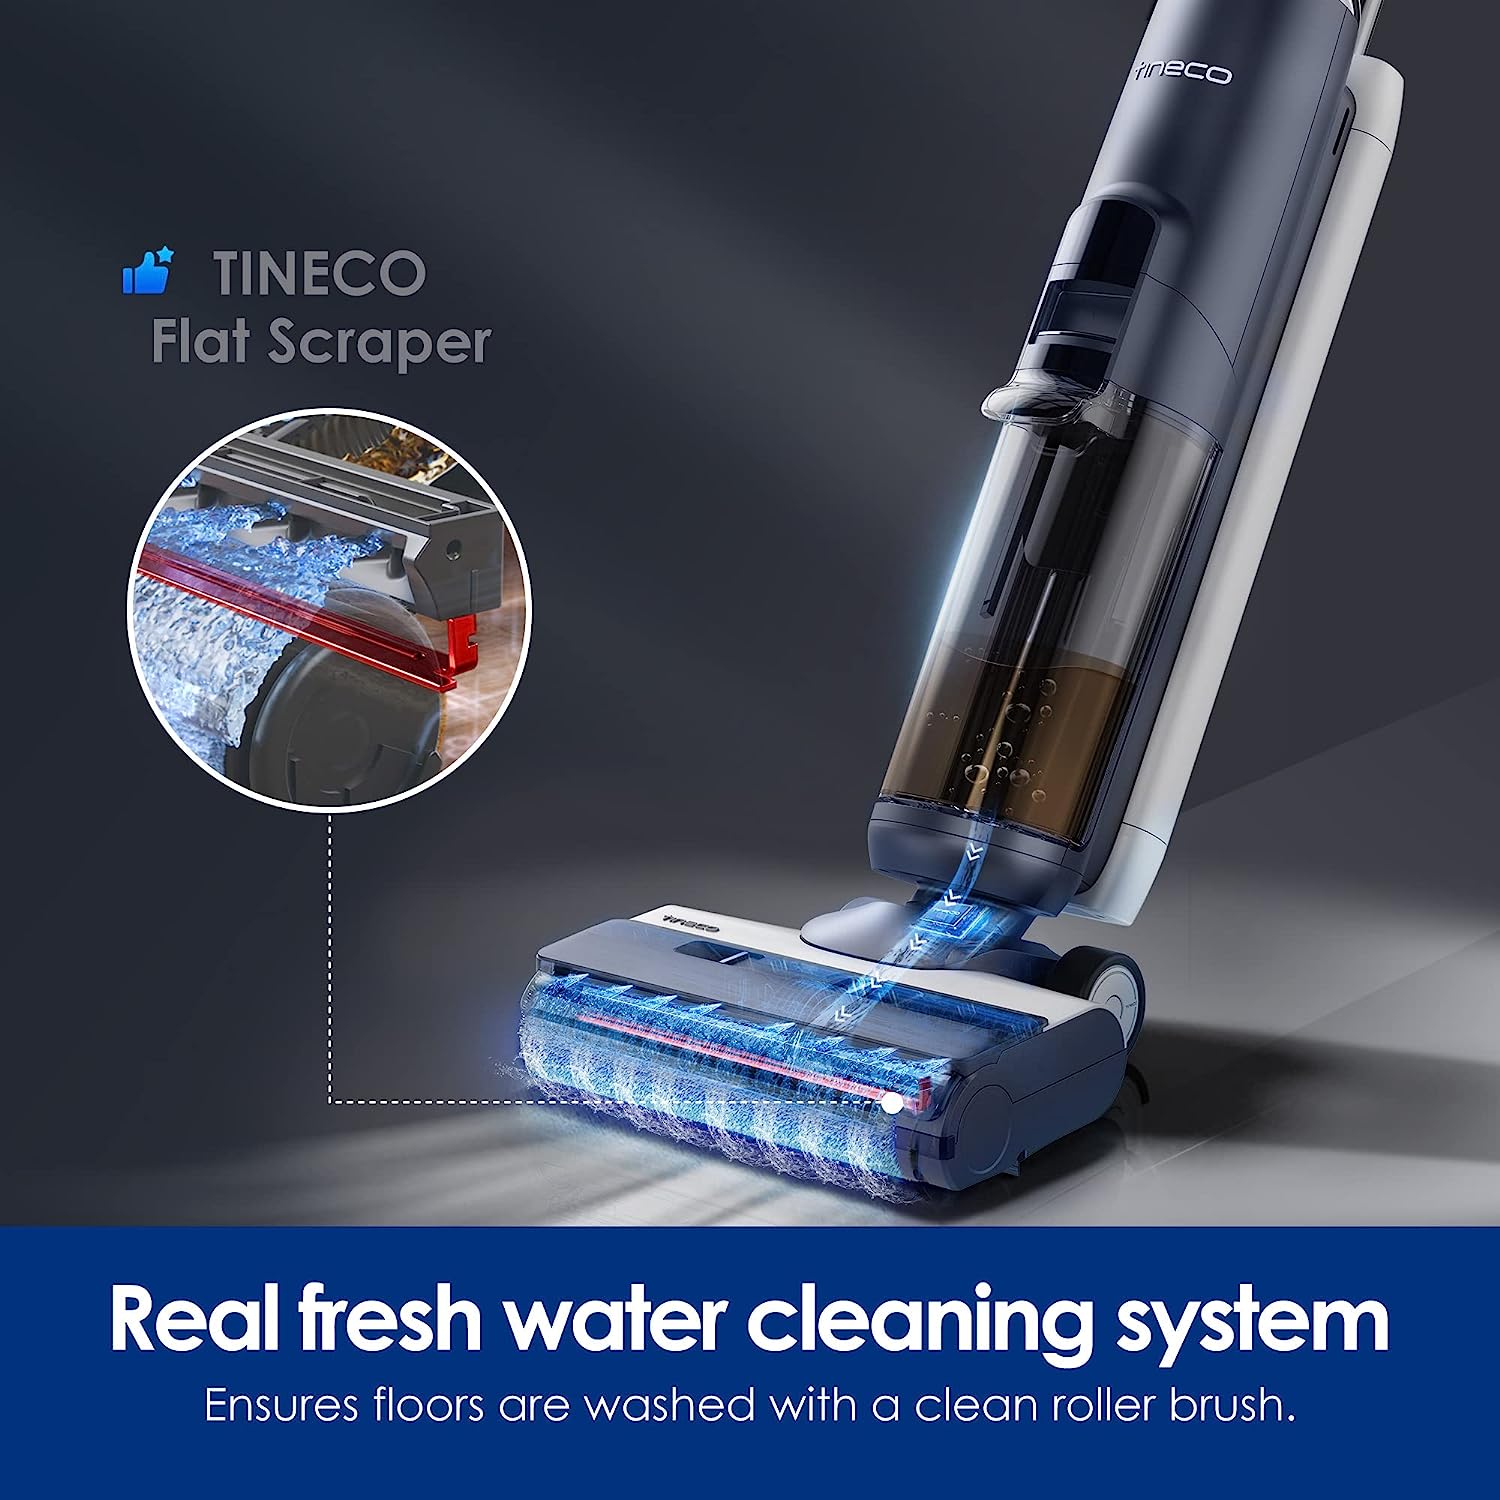 Pour Tineco Floor One S5 Soft Roller Brush And Hepa Filter